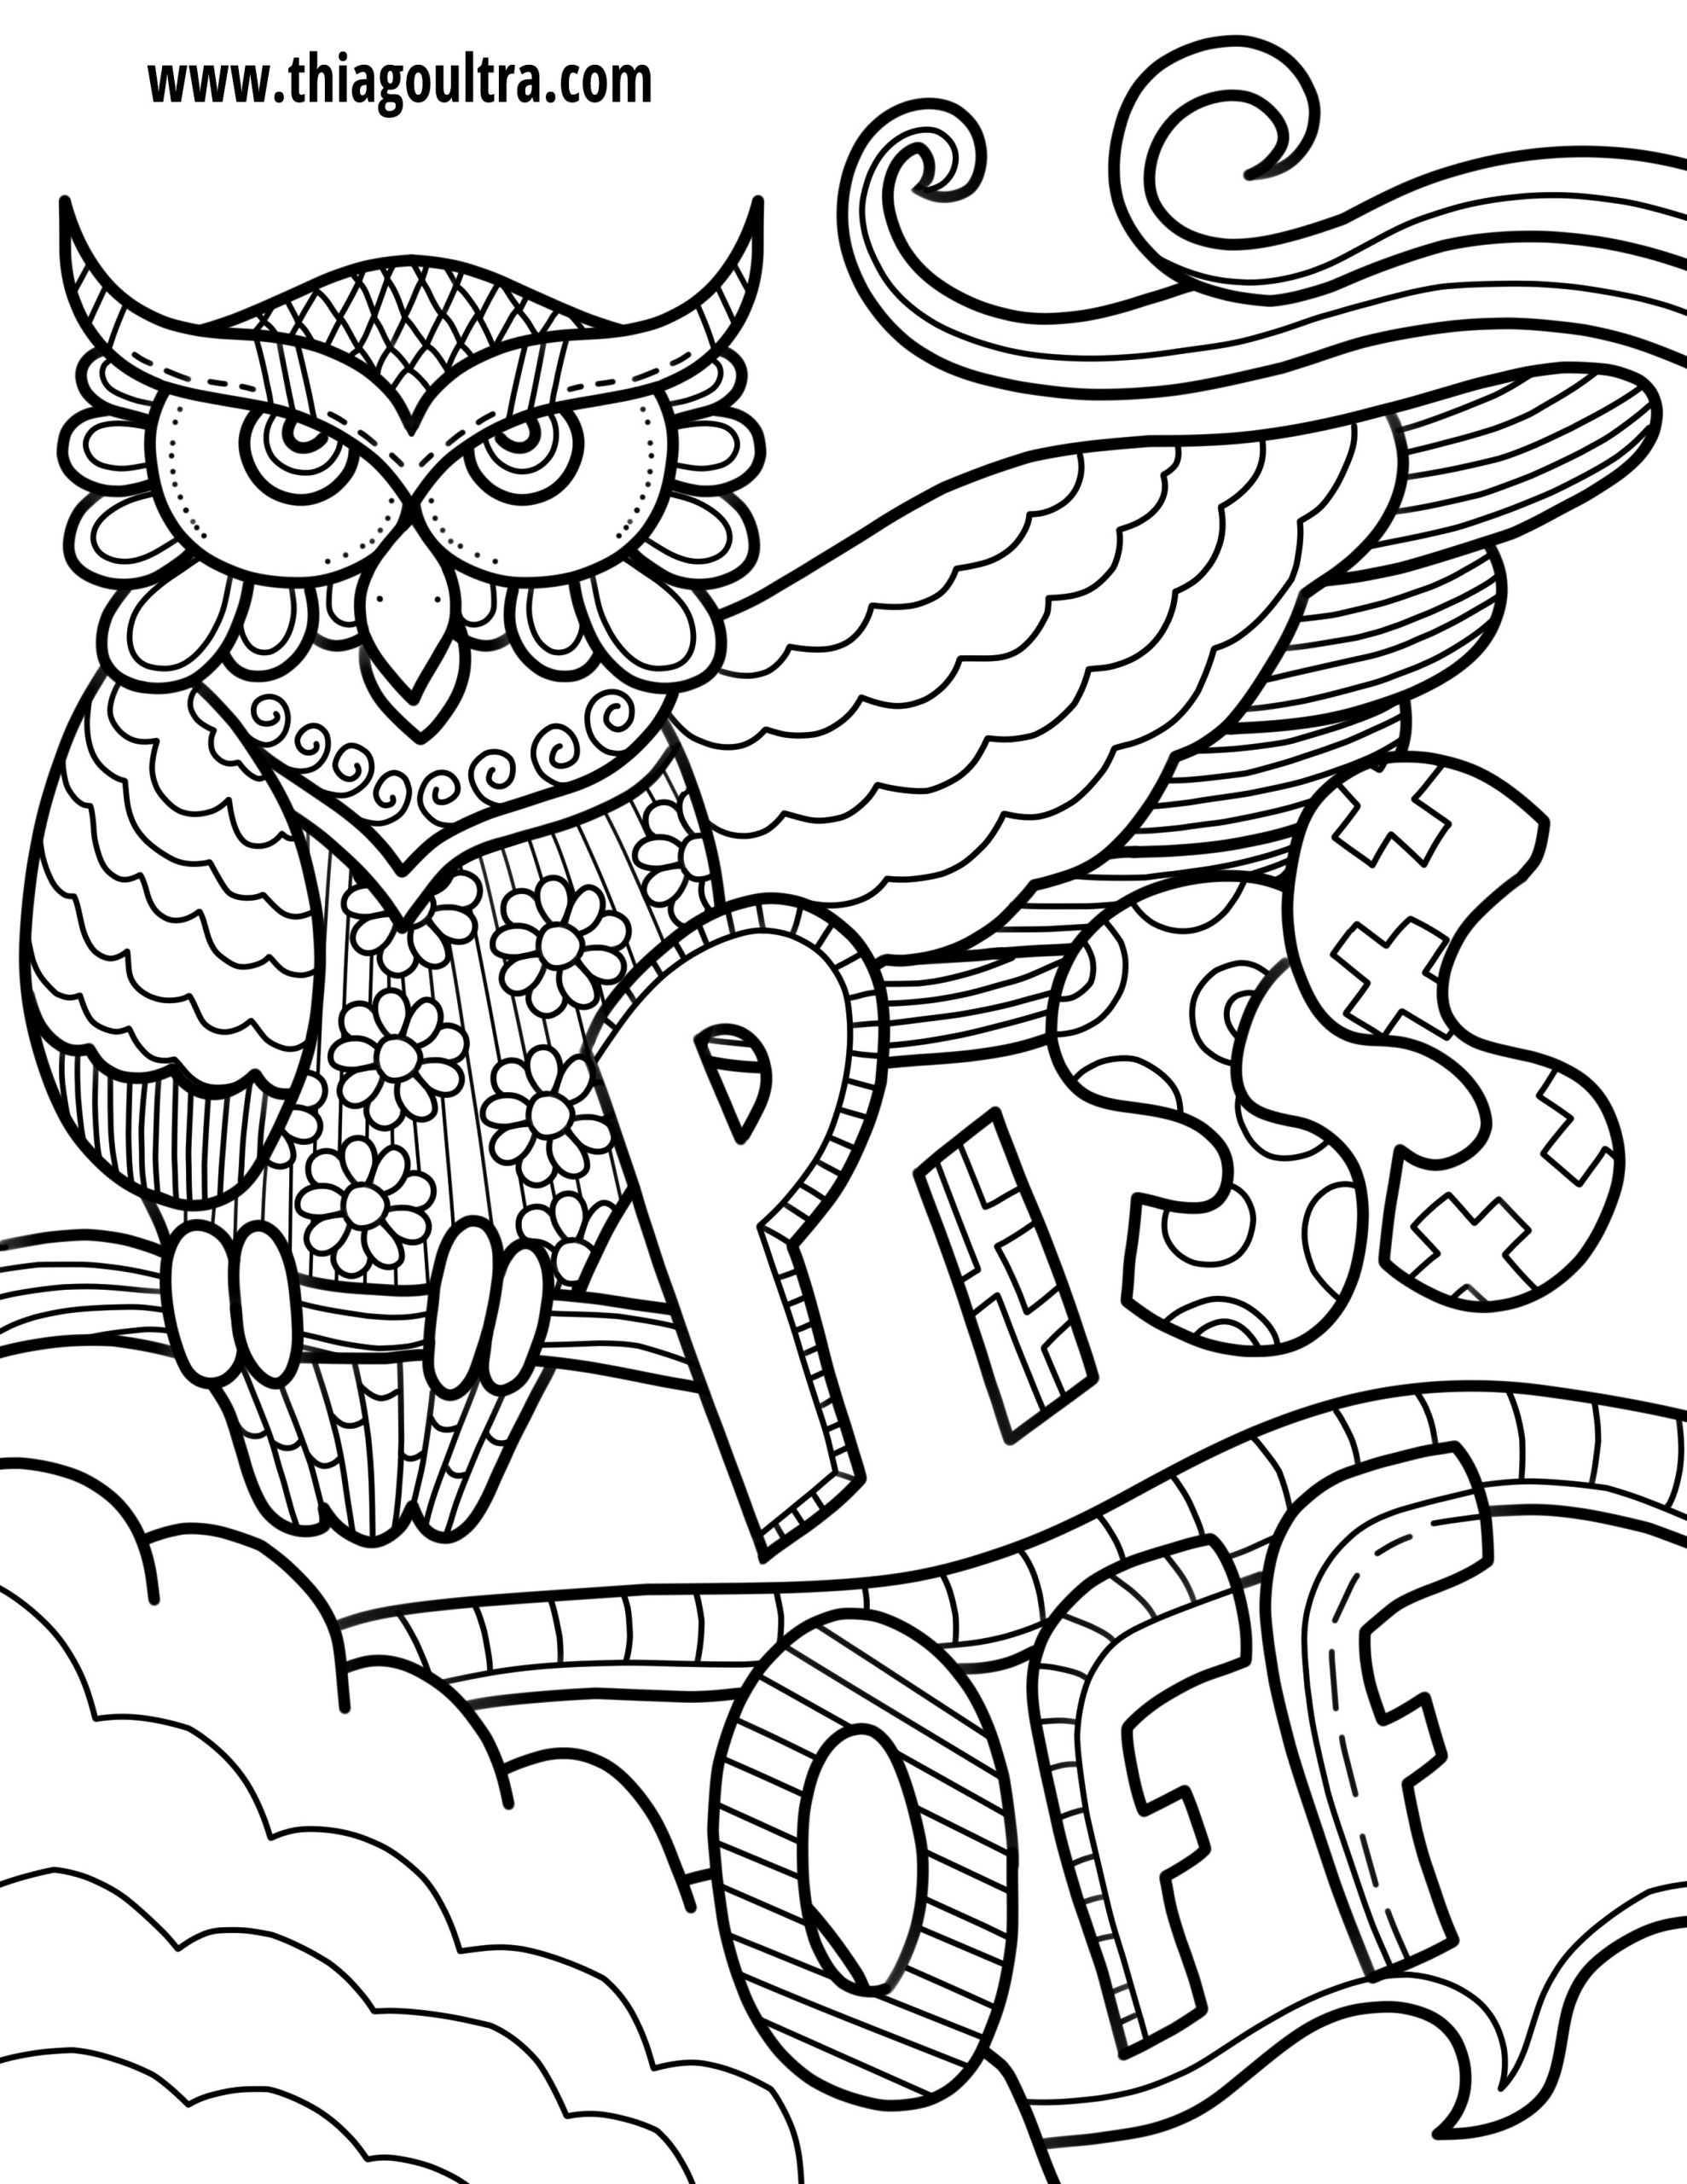 Swear Word Coloring Pages Printable Free
 Printable Swear Word Coloring Pages Free